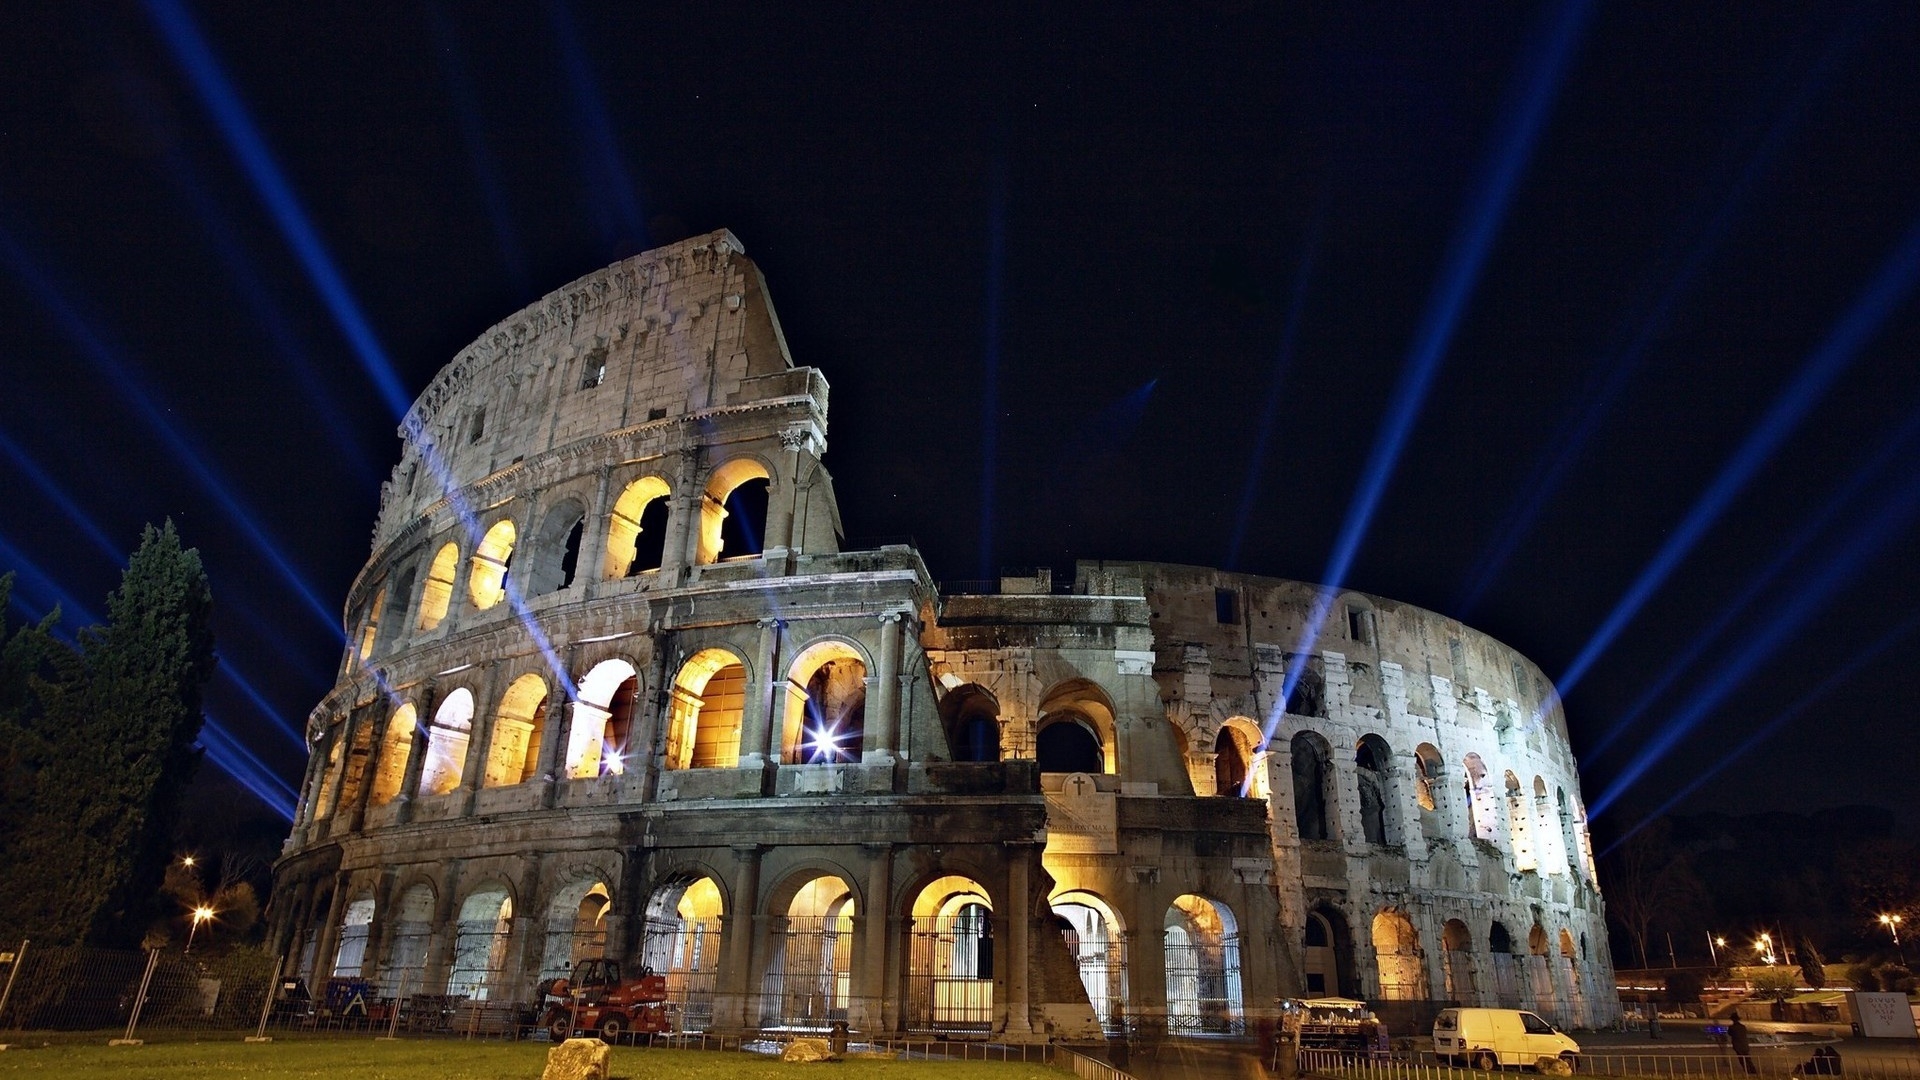 Colloseum during the Night for 1920 x 1080 HDTV 1080p resolution